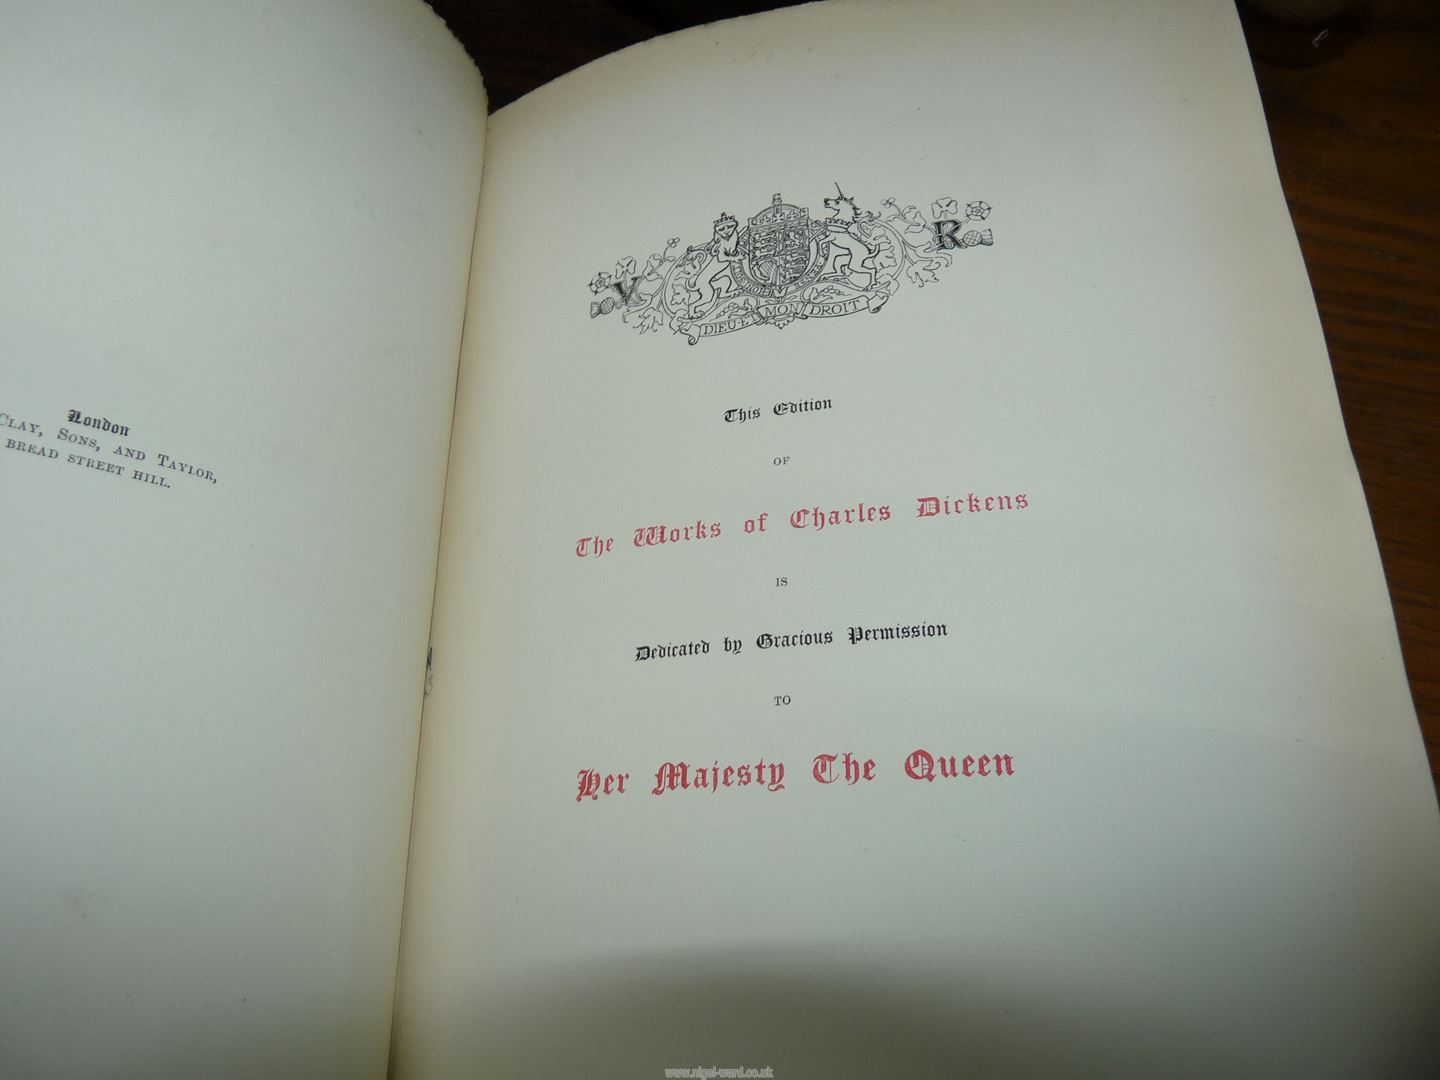 'The Works of Charles Dickens' a limited edition (47/1000) of 30 volumes printed by Chapman and - Image 4 of 6